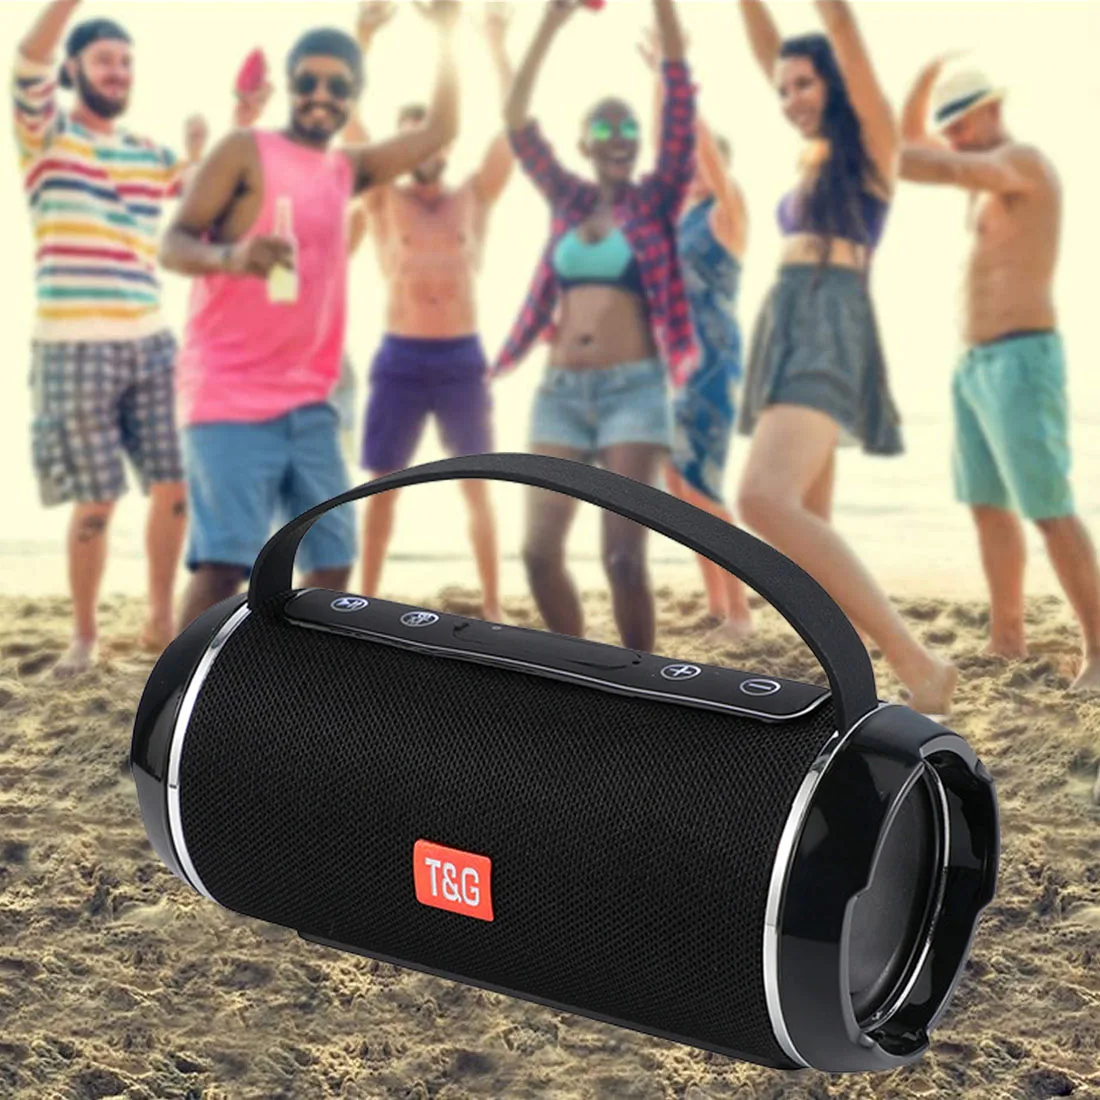 TG116C Wireless Powerful Bluetooth Speaker Box Outdoor Speakers Subwoofer Music Center BoomBox 3D Stereo Radio